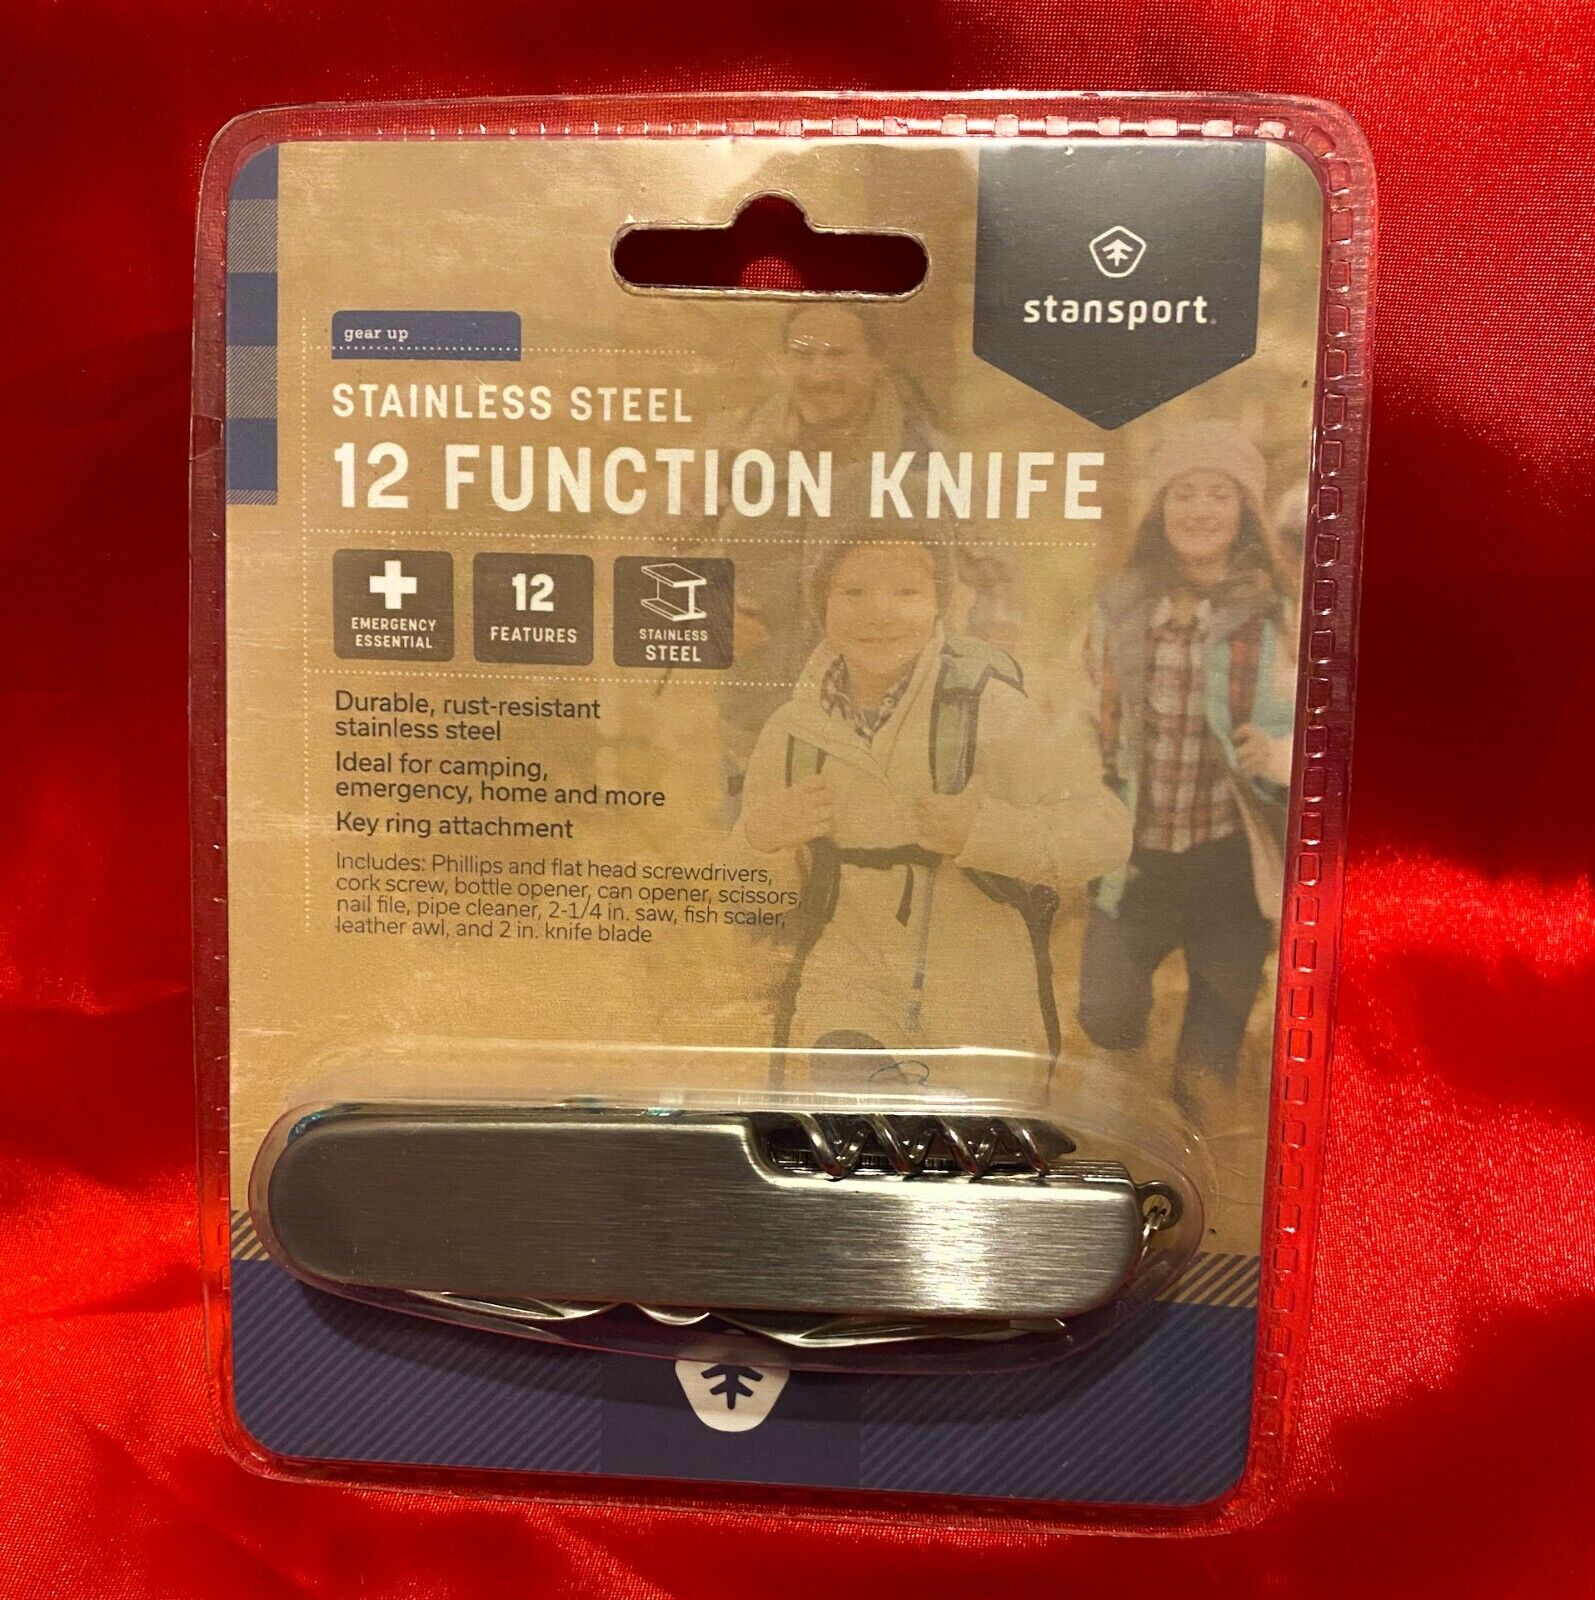 NEW Multi Tool Knife Swiss Army Stainless Steel 12-Function, keyring Stansport